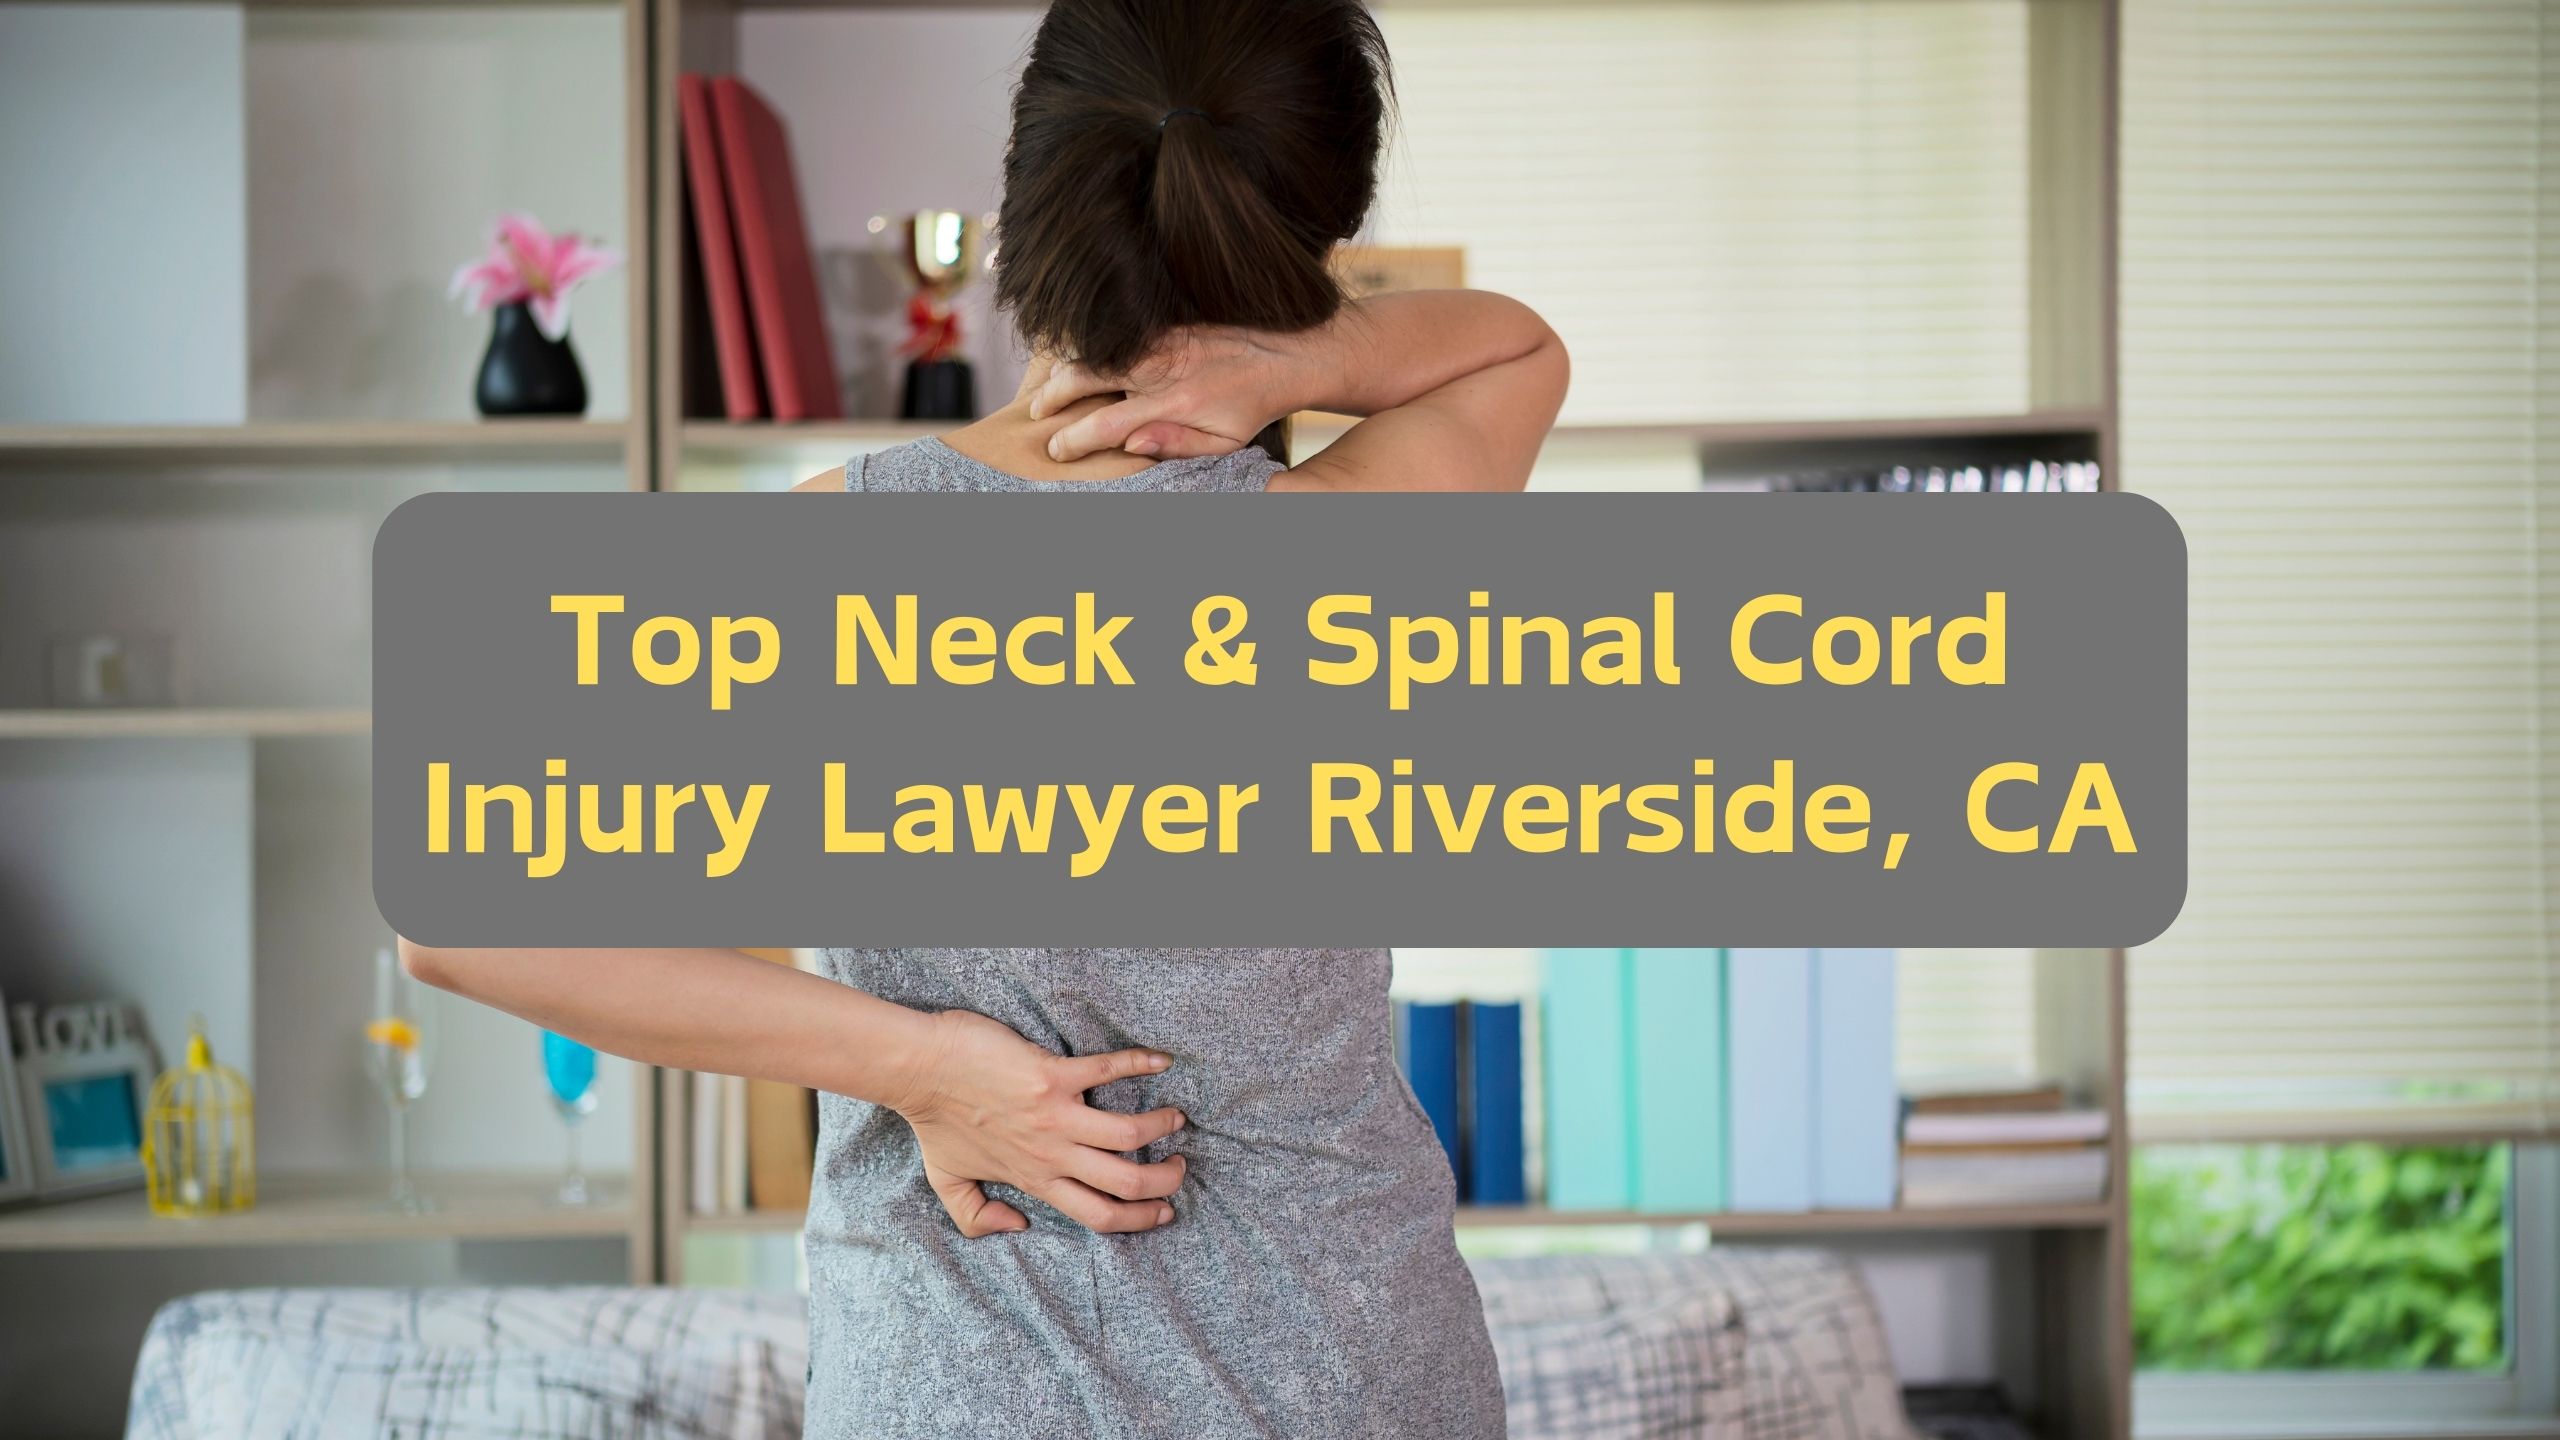 Top Neck & Spinal Cord Injury Lawyer